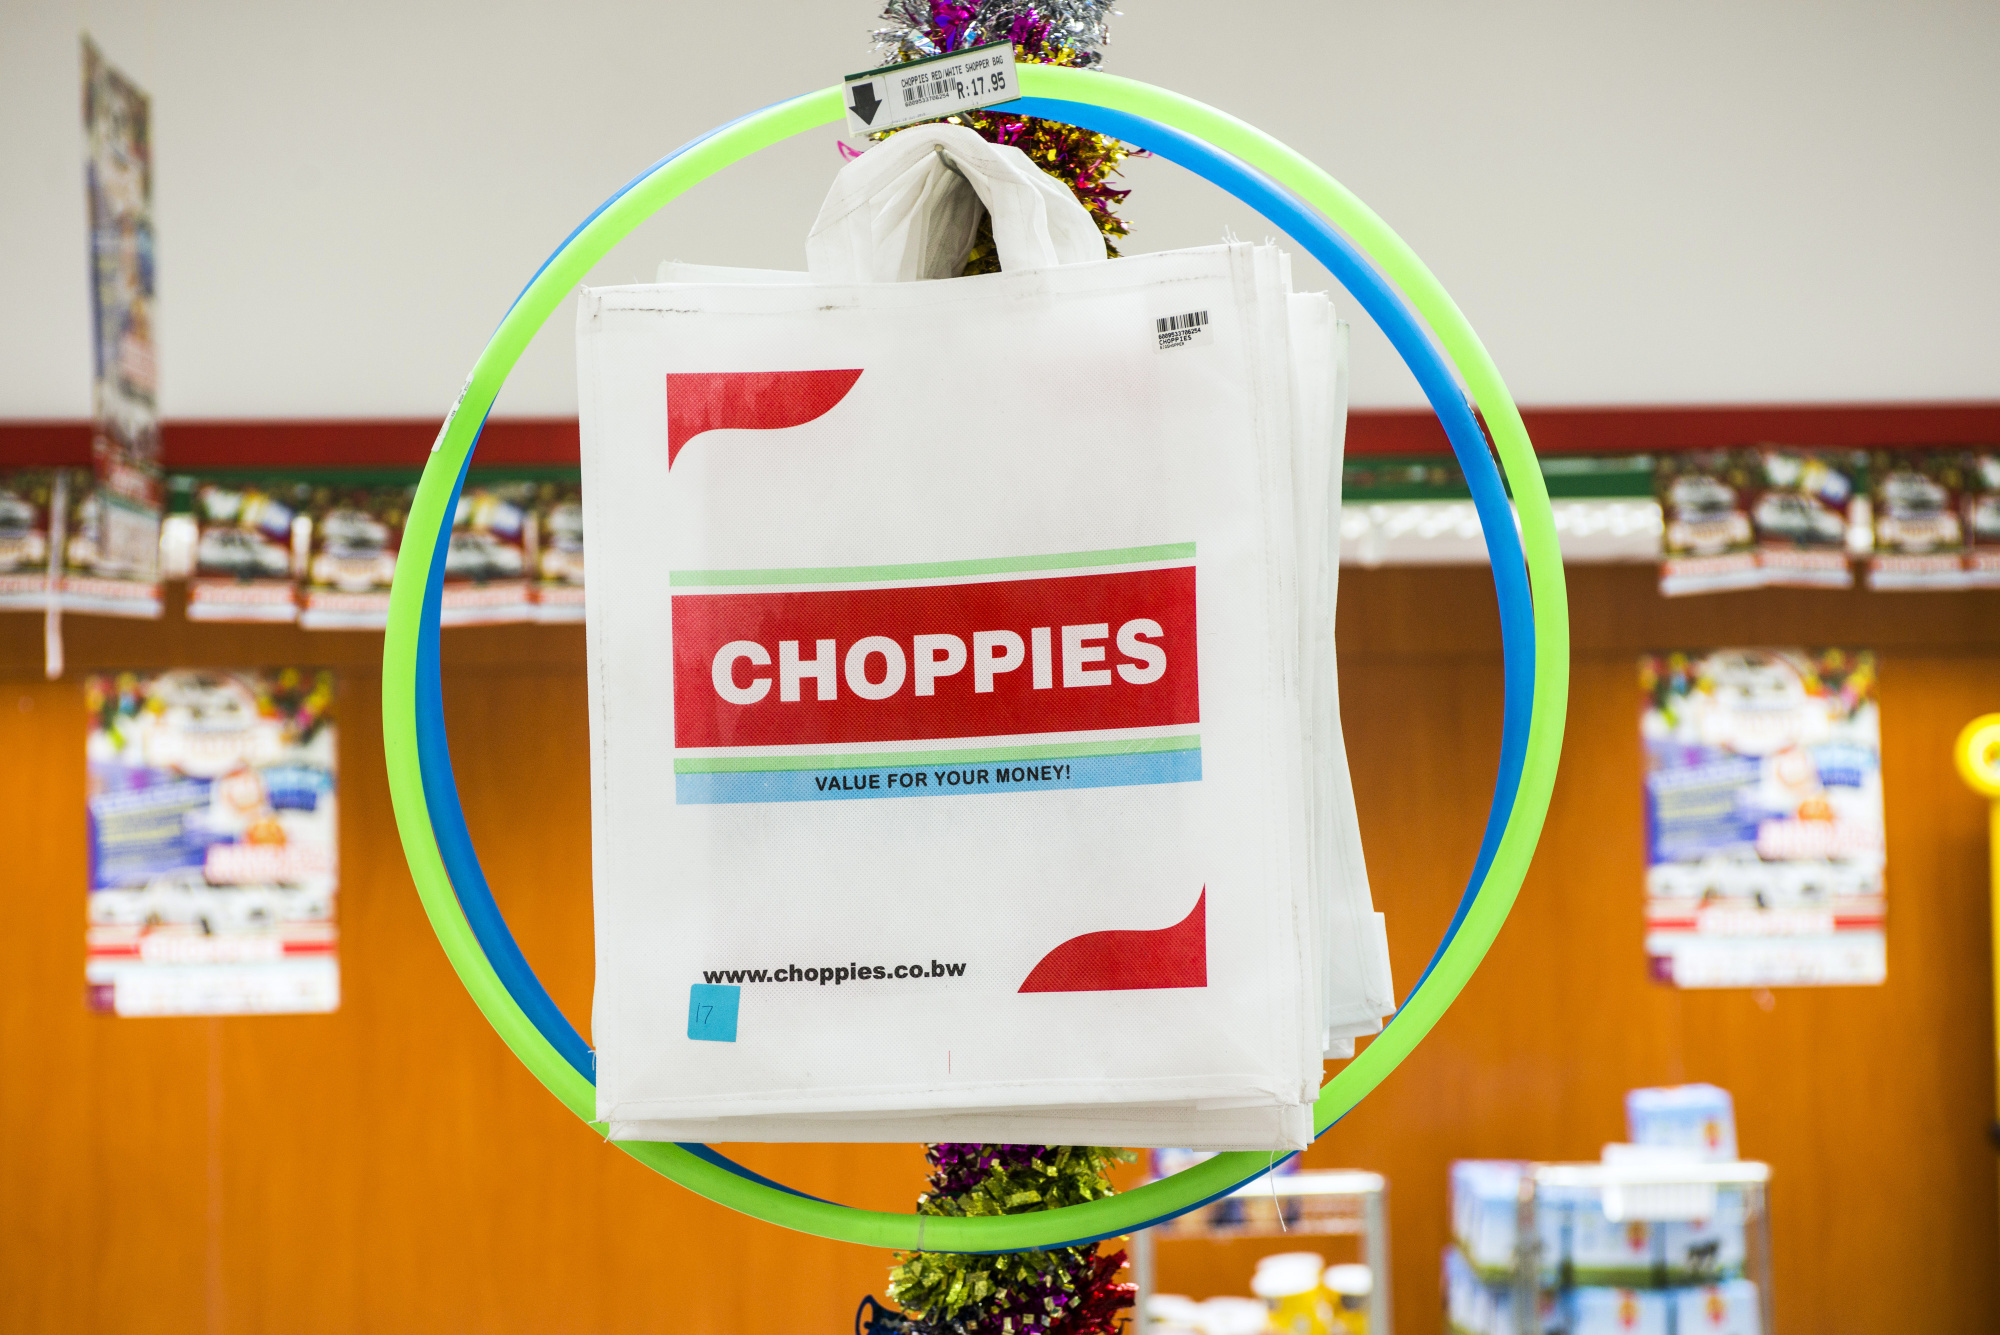 Choppies branded long-life shopping bags hang on display inside a Choppies supermarket.